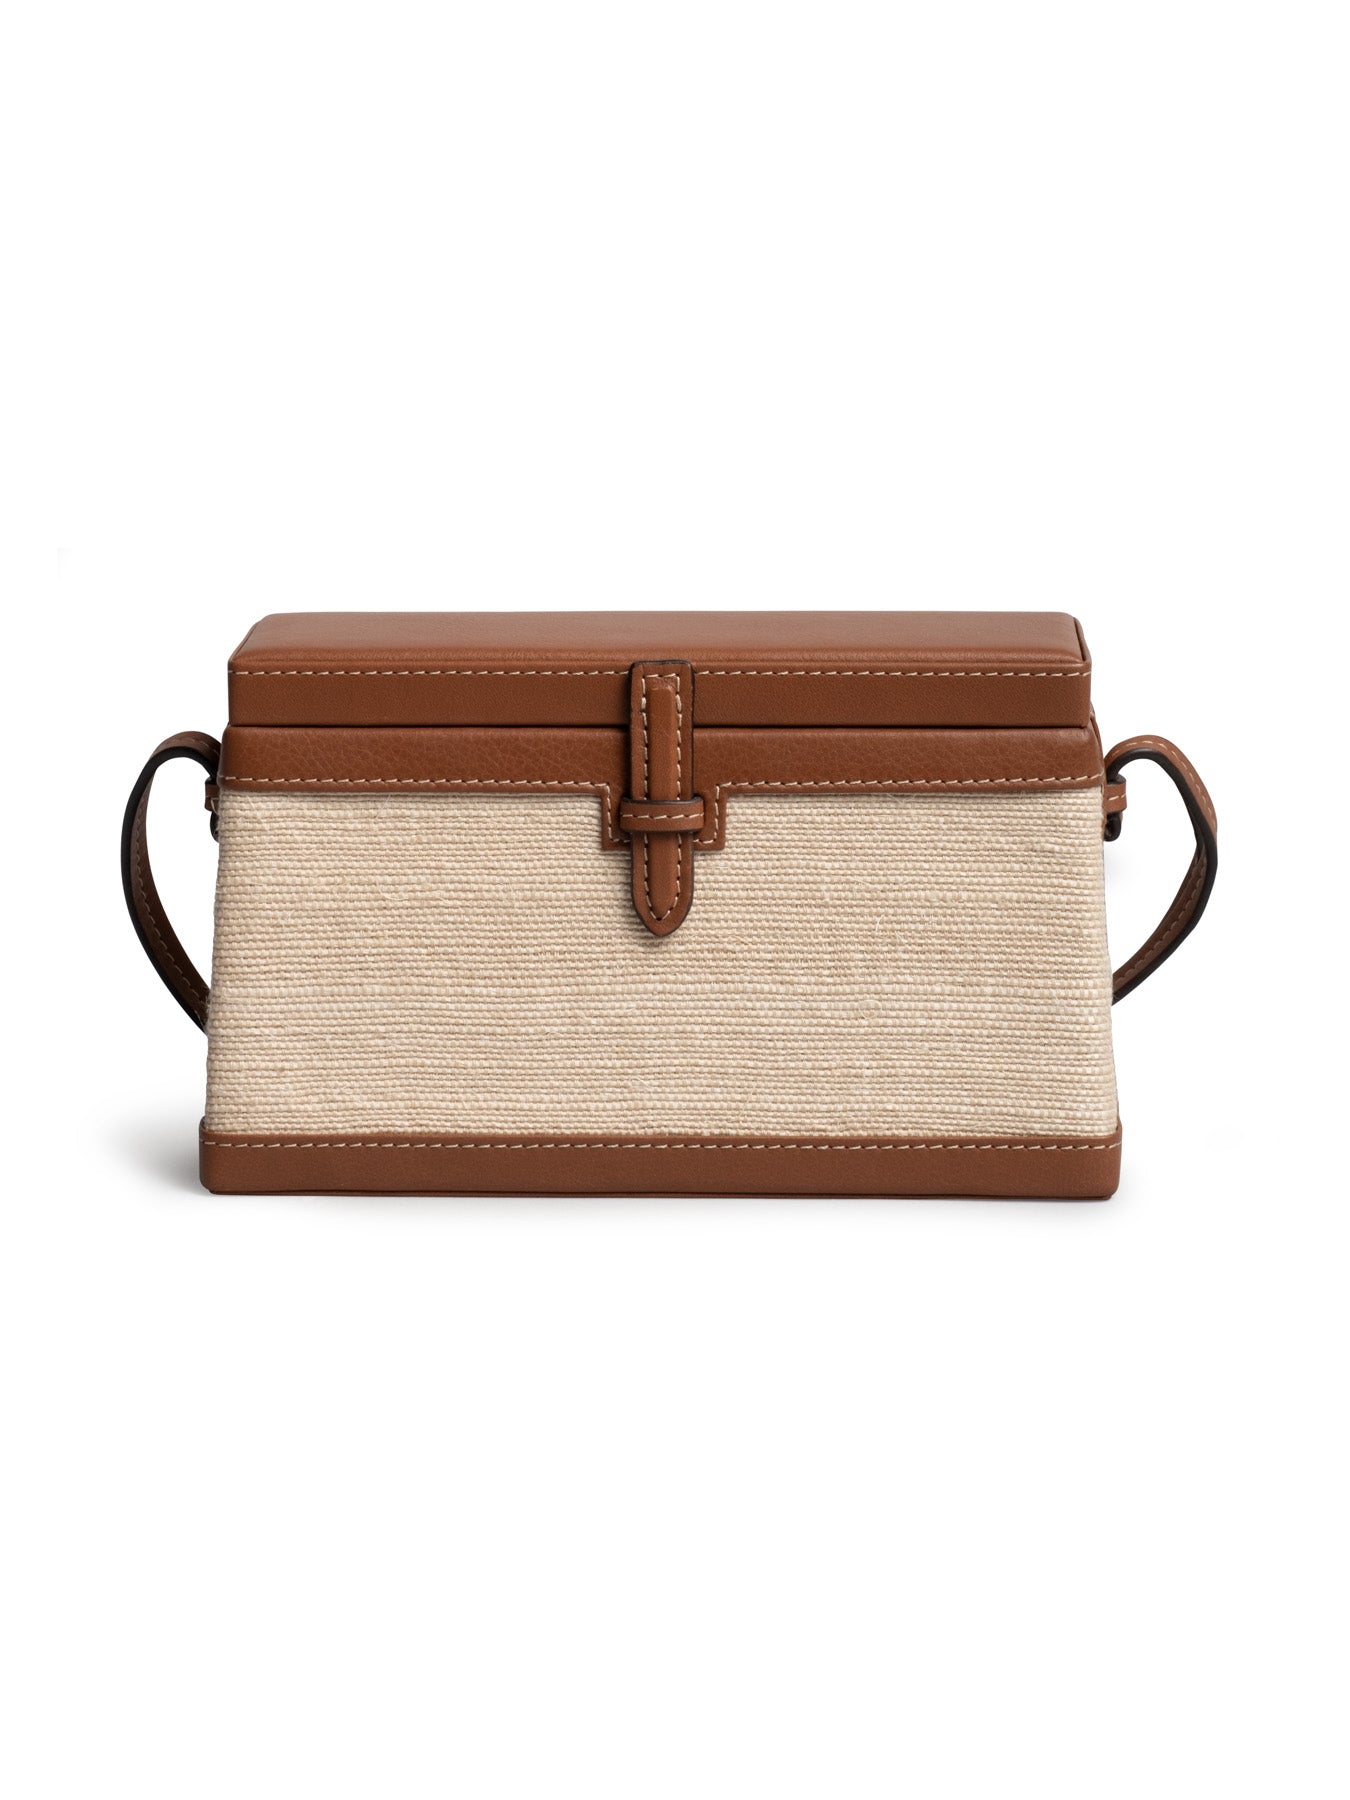 Hunting Season - The Square Trunk in Nappa and Woven Fique